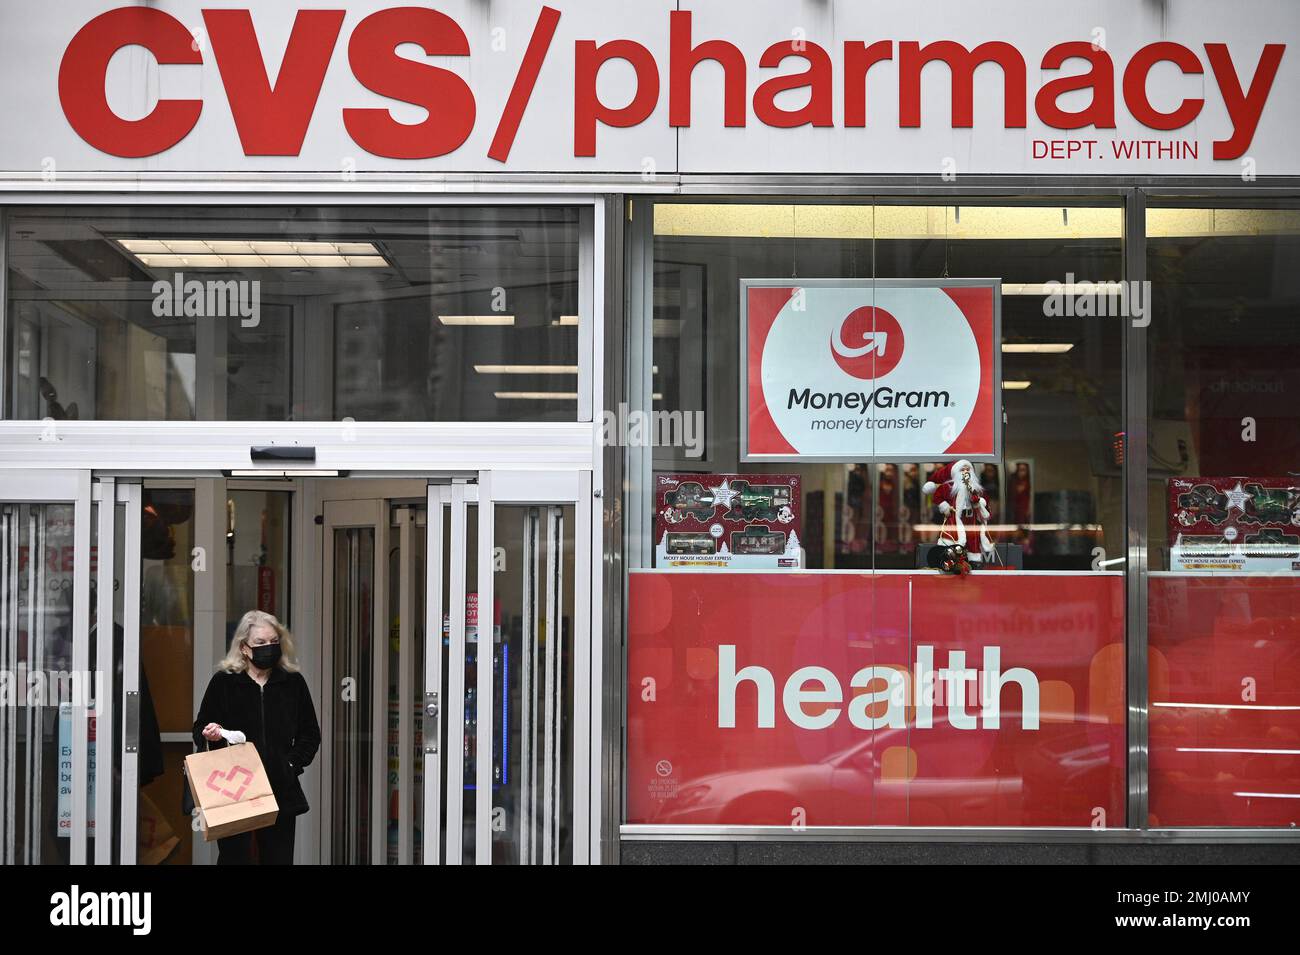 CVS, the largest drugstore chain in the United States, announced that it  will be closing 900 stores, 10% of its pharmacies over a three year period,  New York, NY, November 22, 2021.